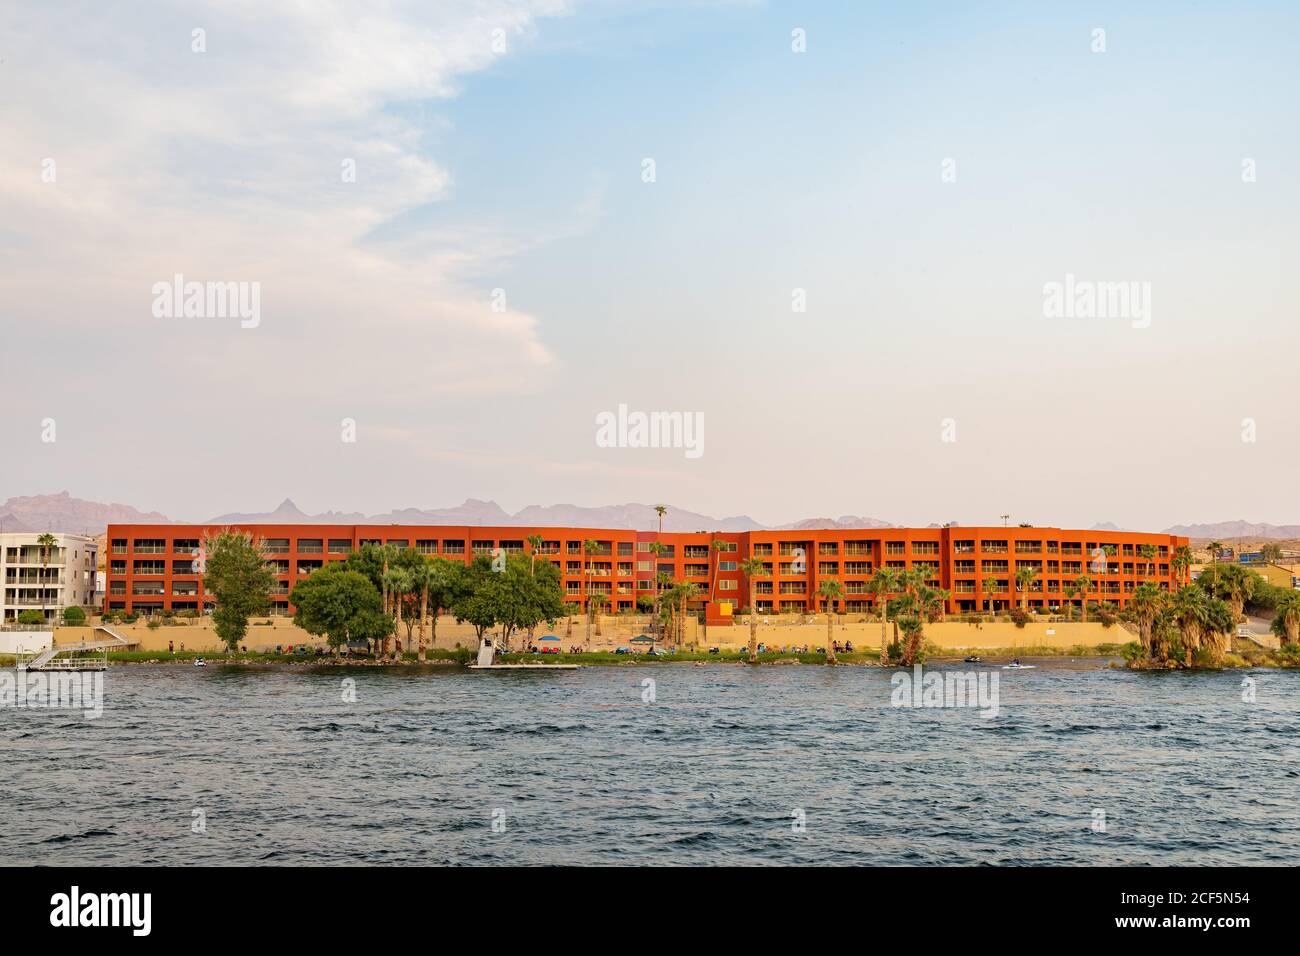 Laughlin, AUG 22, 2020 - Modern residence building by the river Stock Photo